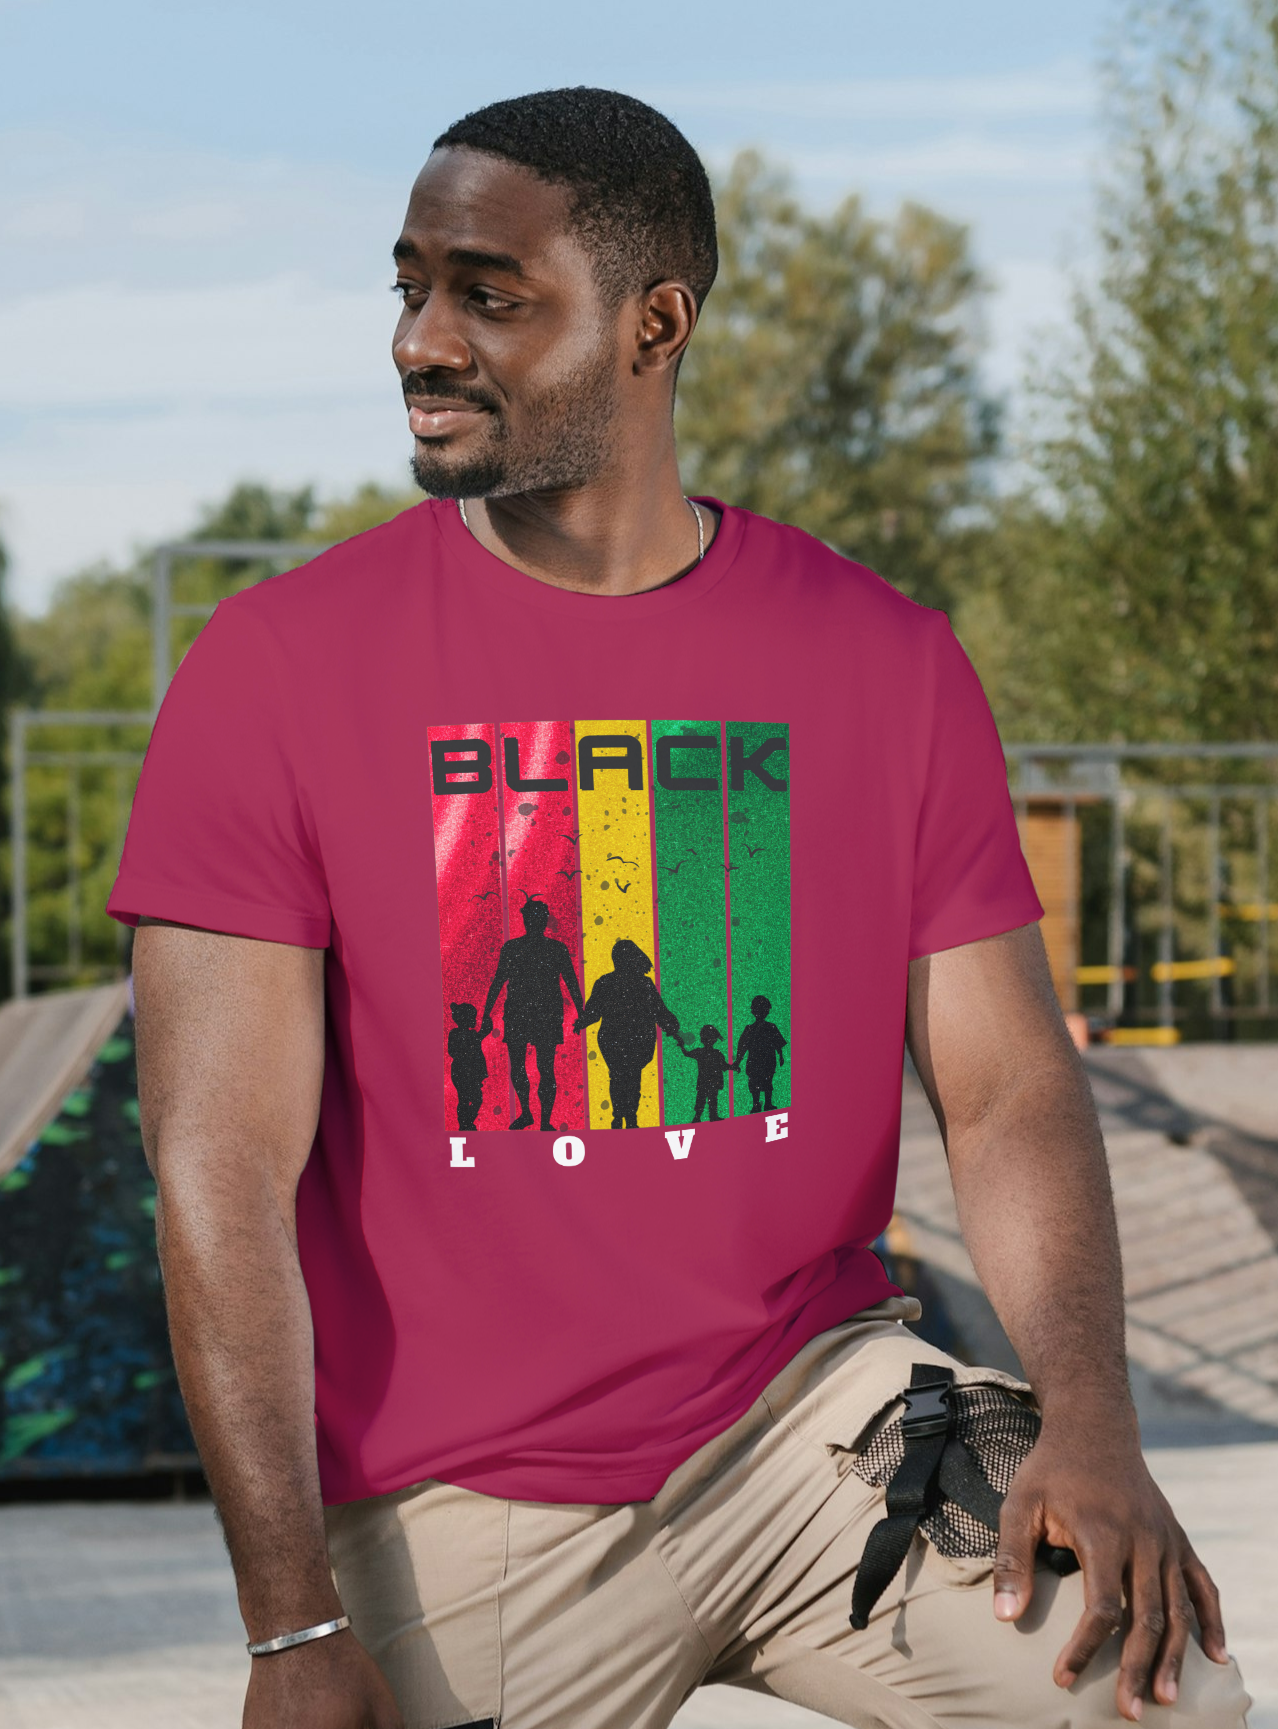 ROOTS OF LOVE - BLACK FAMILY LOVE T-SHIRT